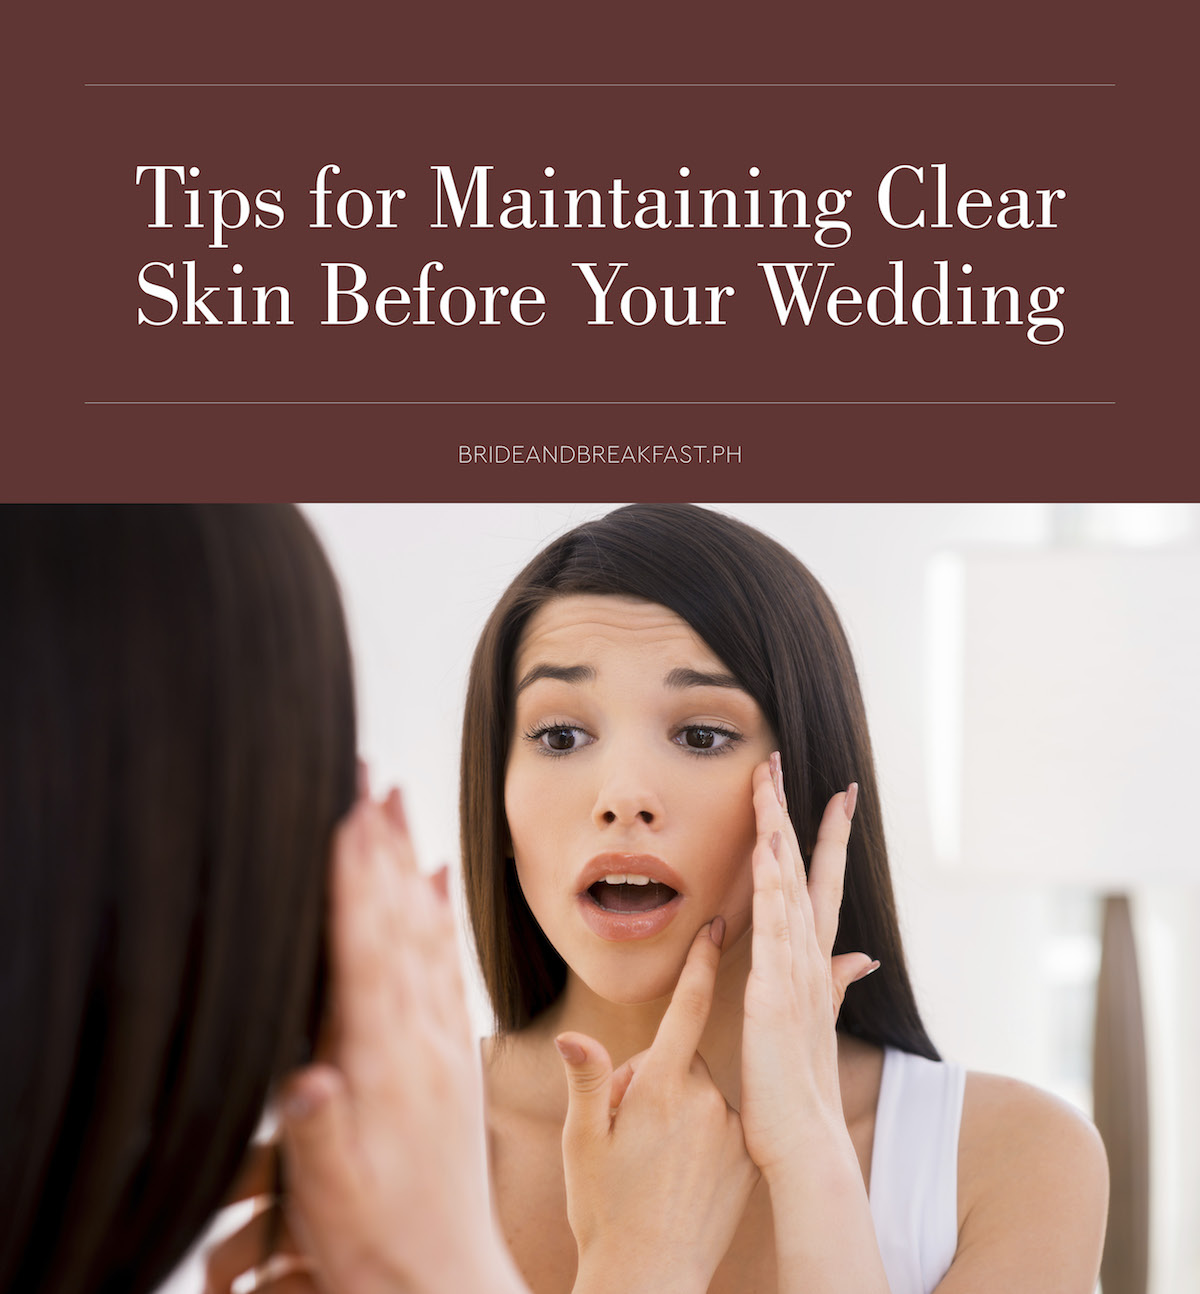 Tips for Maintaining Clear Skin Before Your Wedding